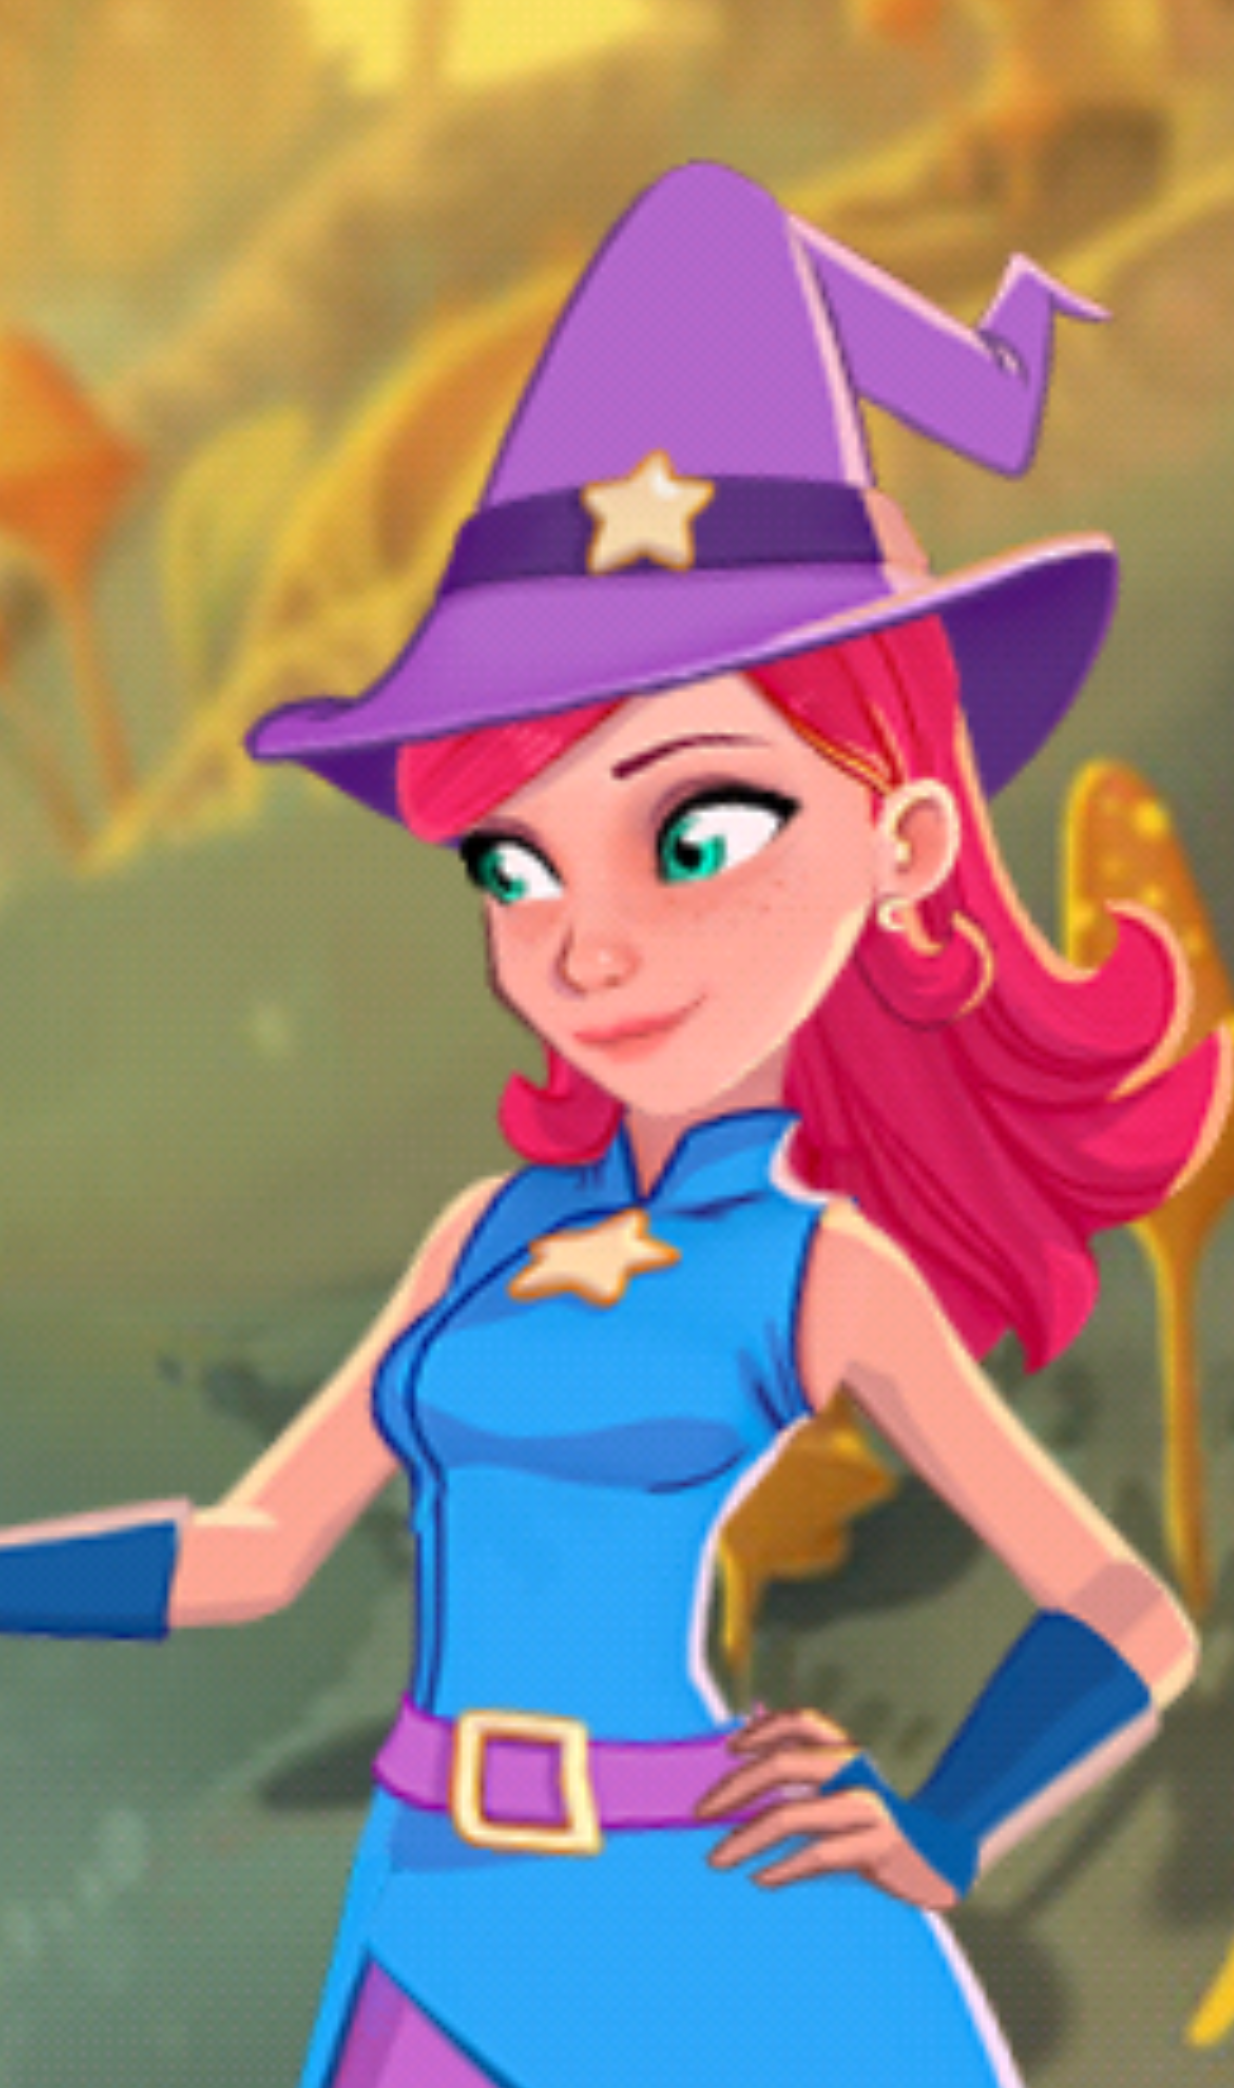 what levels in bubble witch saga 3 have bat bubbles